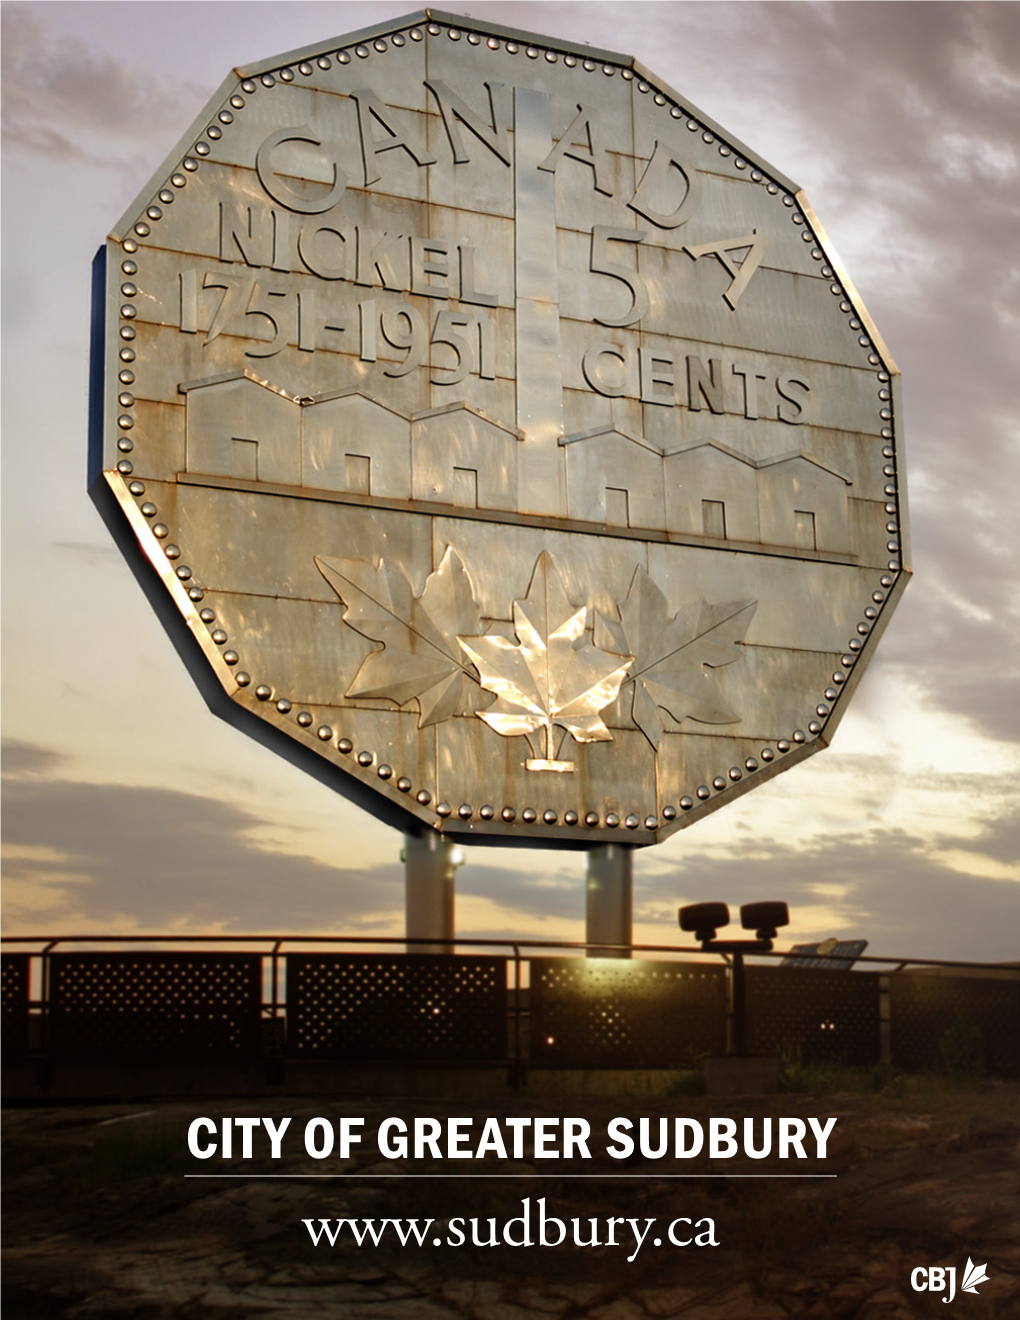 Lifestyle in Sudbury Responsible a Safe, Family-Oriented Community, Greater Sudbury Offers Plenty of Recreational Amenities and Educational and Work Opportunities